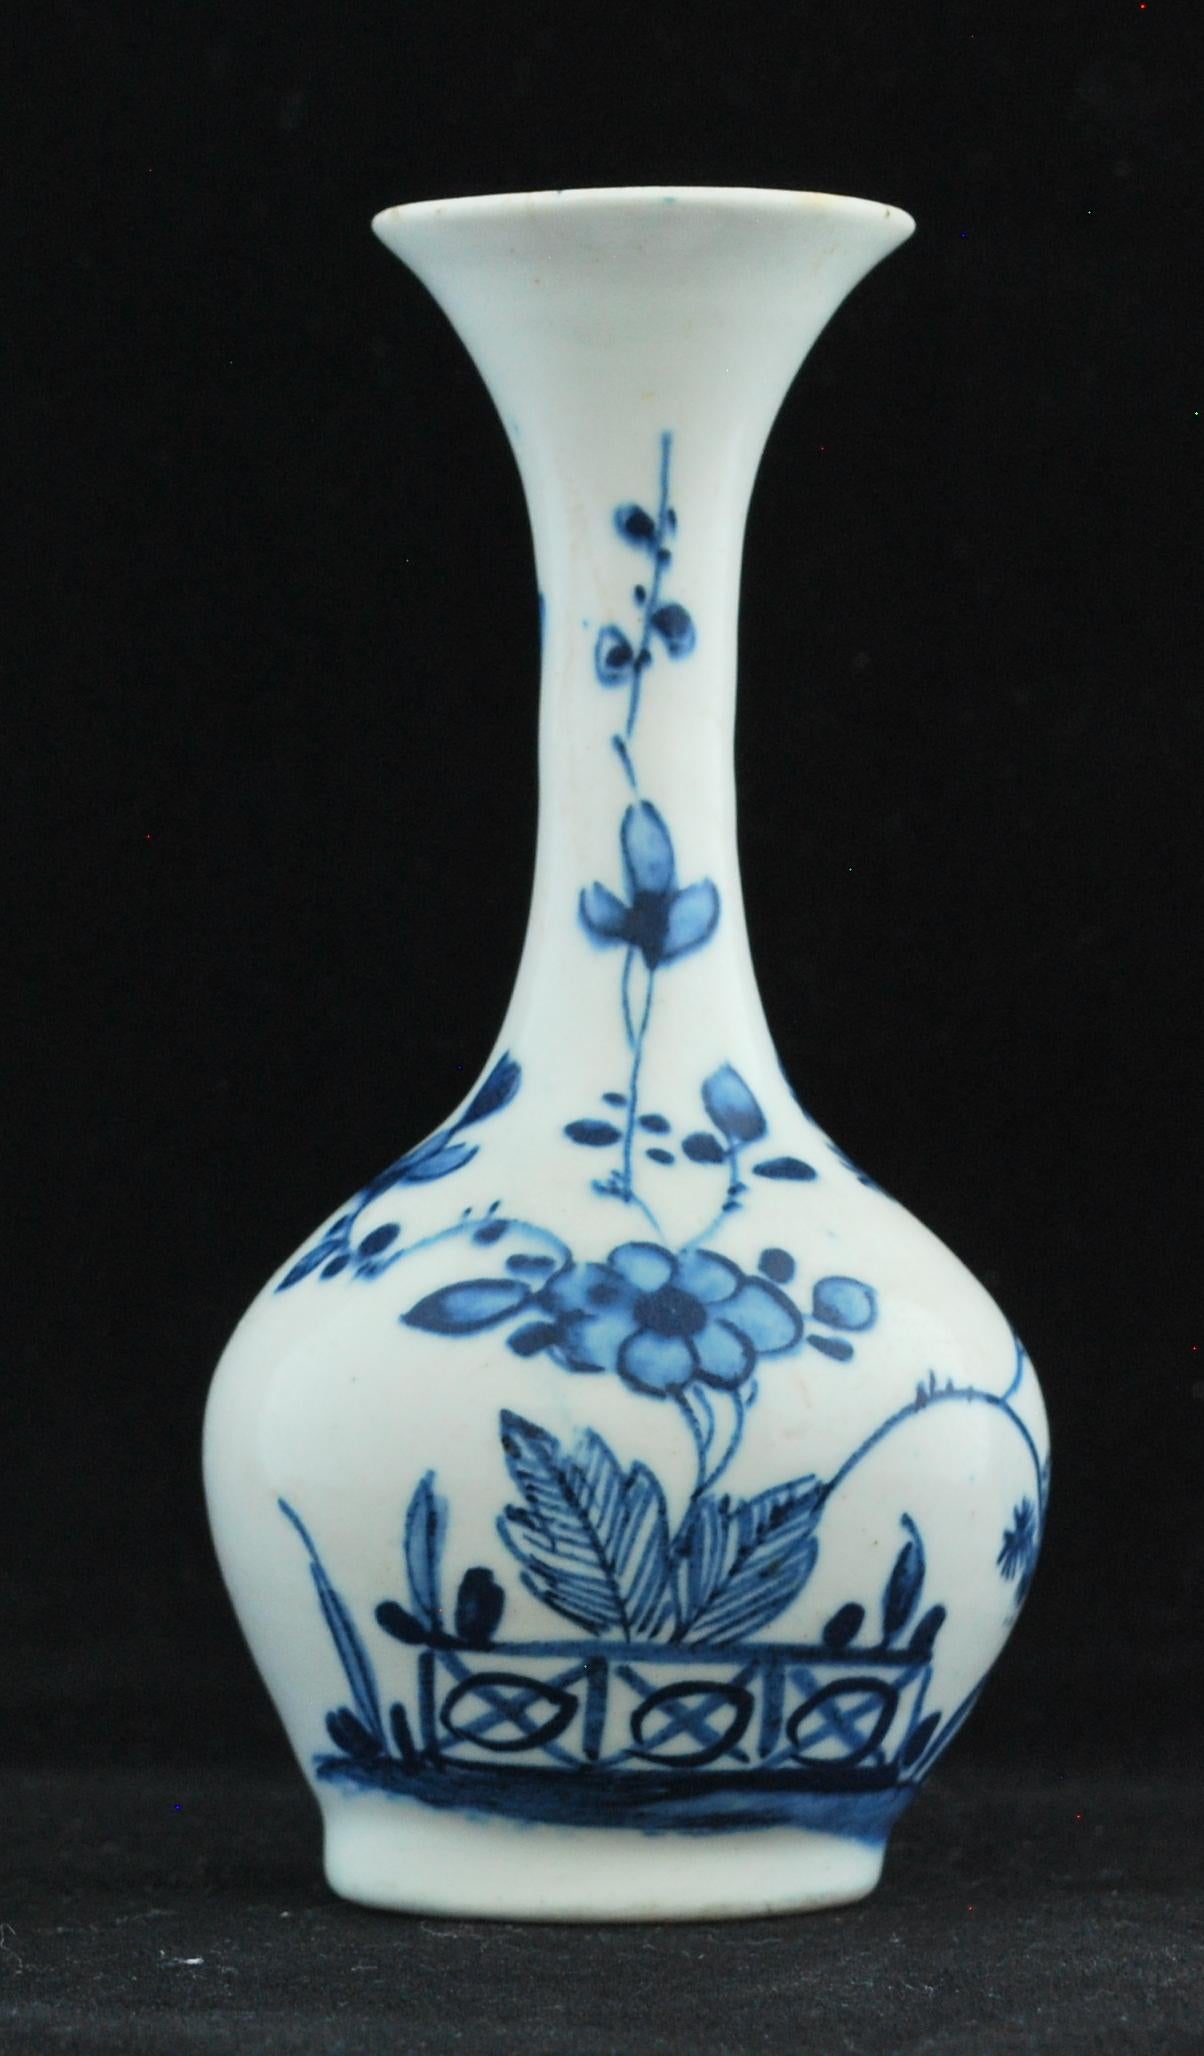 Bottle, circa 1746-1748: Small thrown bottle vase of bulbous form with elongated neck and flaring trumpet top. Somewhat primitively painted in tones of a ‘sooty’ blue underglaze with a rambling plant rising from behind a fence among leaves and